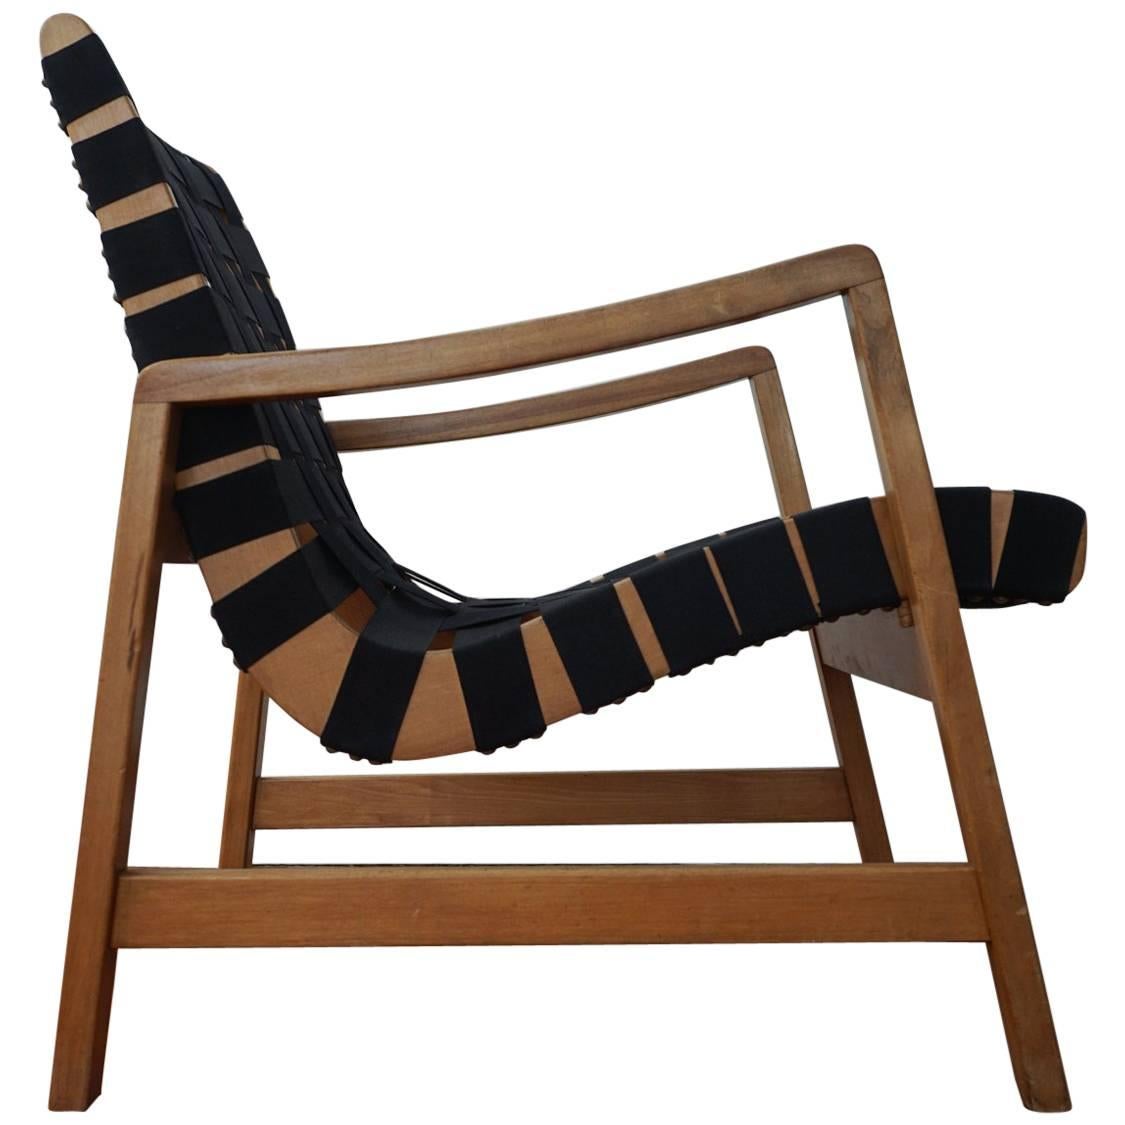 Early 1950s Strap Lounge Chair by Jens Risom for Knoll